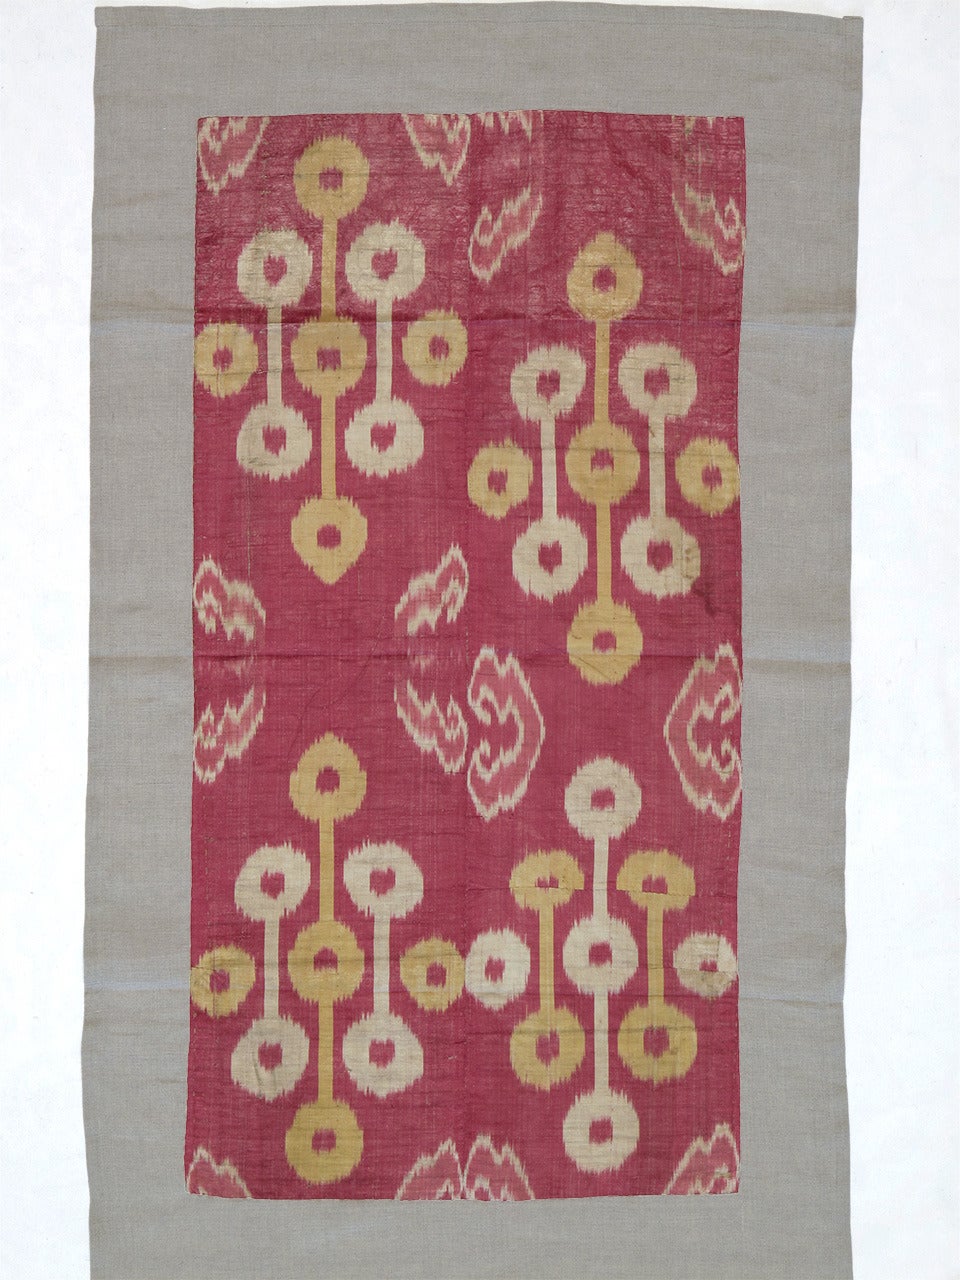 Antique Silk Ikat panel. A beautiful antique textile from Uzbekistan in Central Asia, a fragment from a larger panel woven in silk ikat technique. Such fabrics were traditionally used to make garments or as ceremonial covers.

The piece is